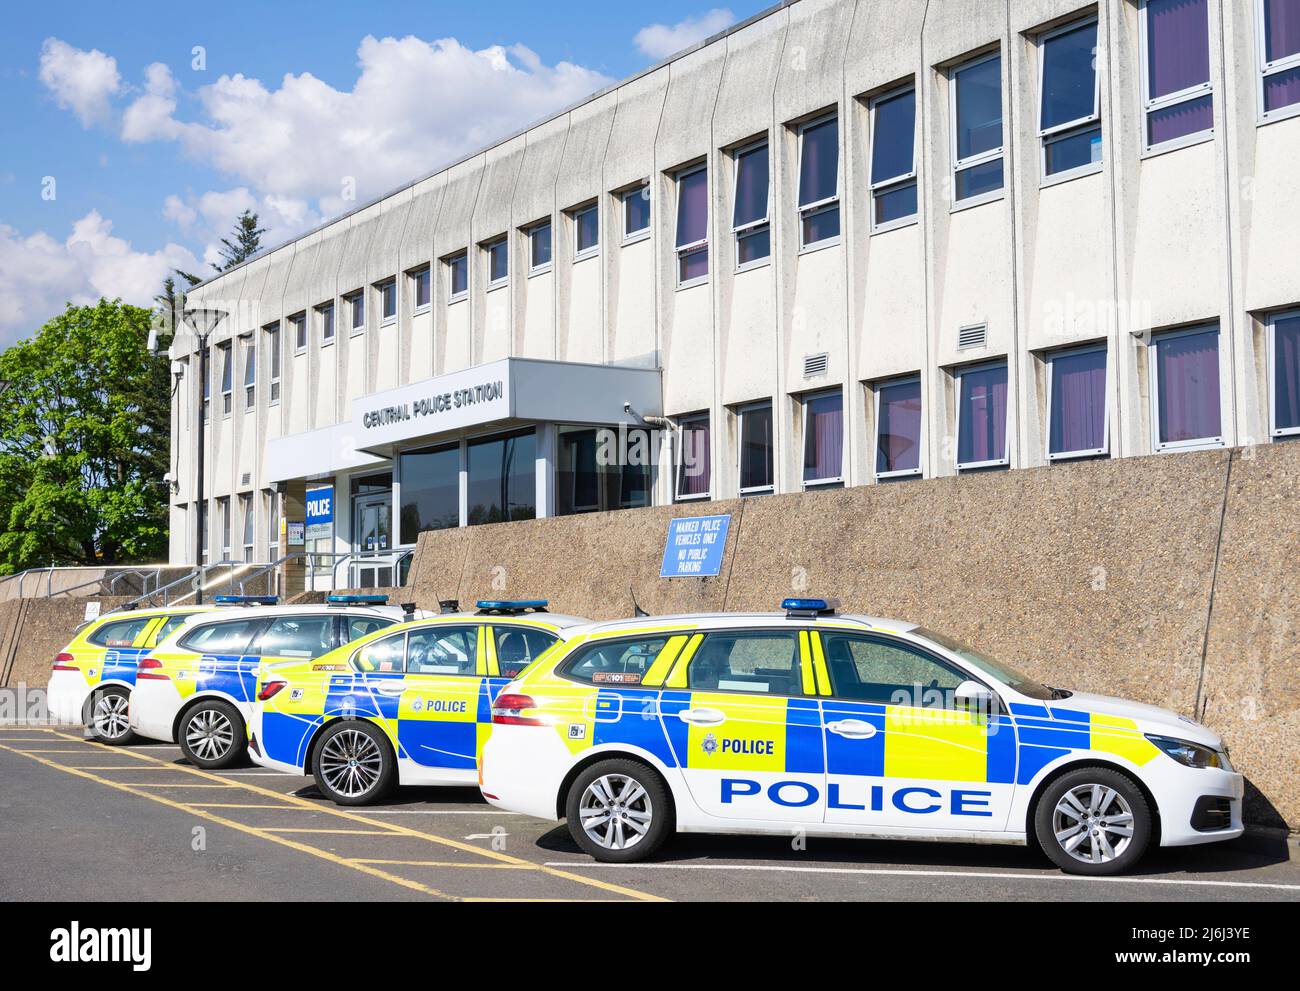 Police cars parked outside a Police station uk police station exterior with police cars parked outside UK GB Europe Stock Photo